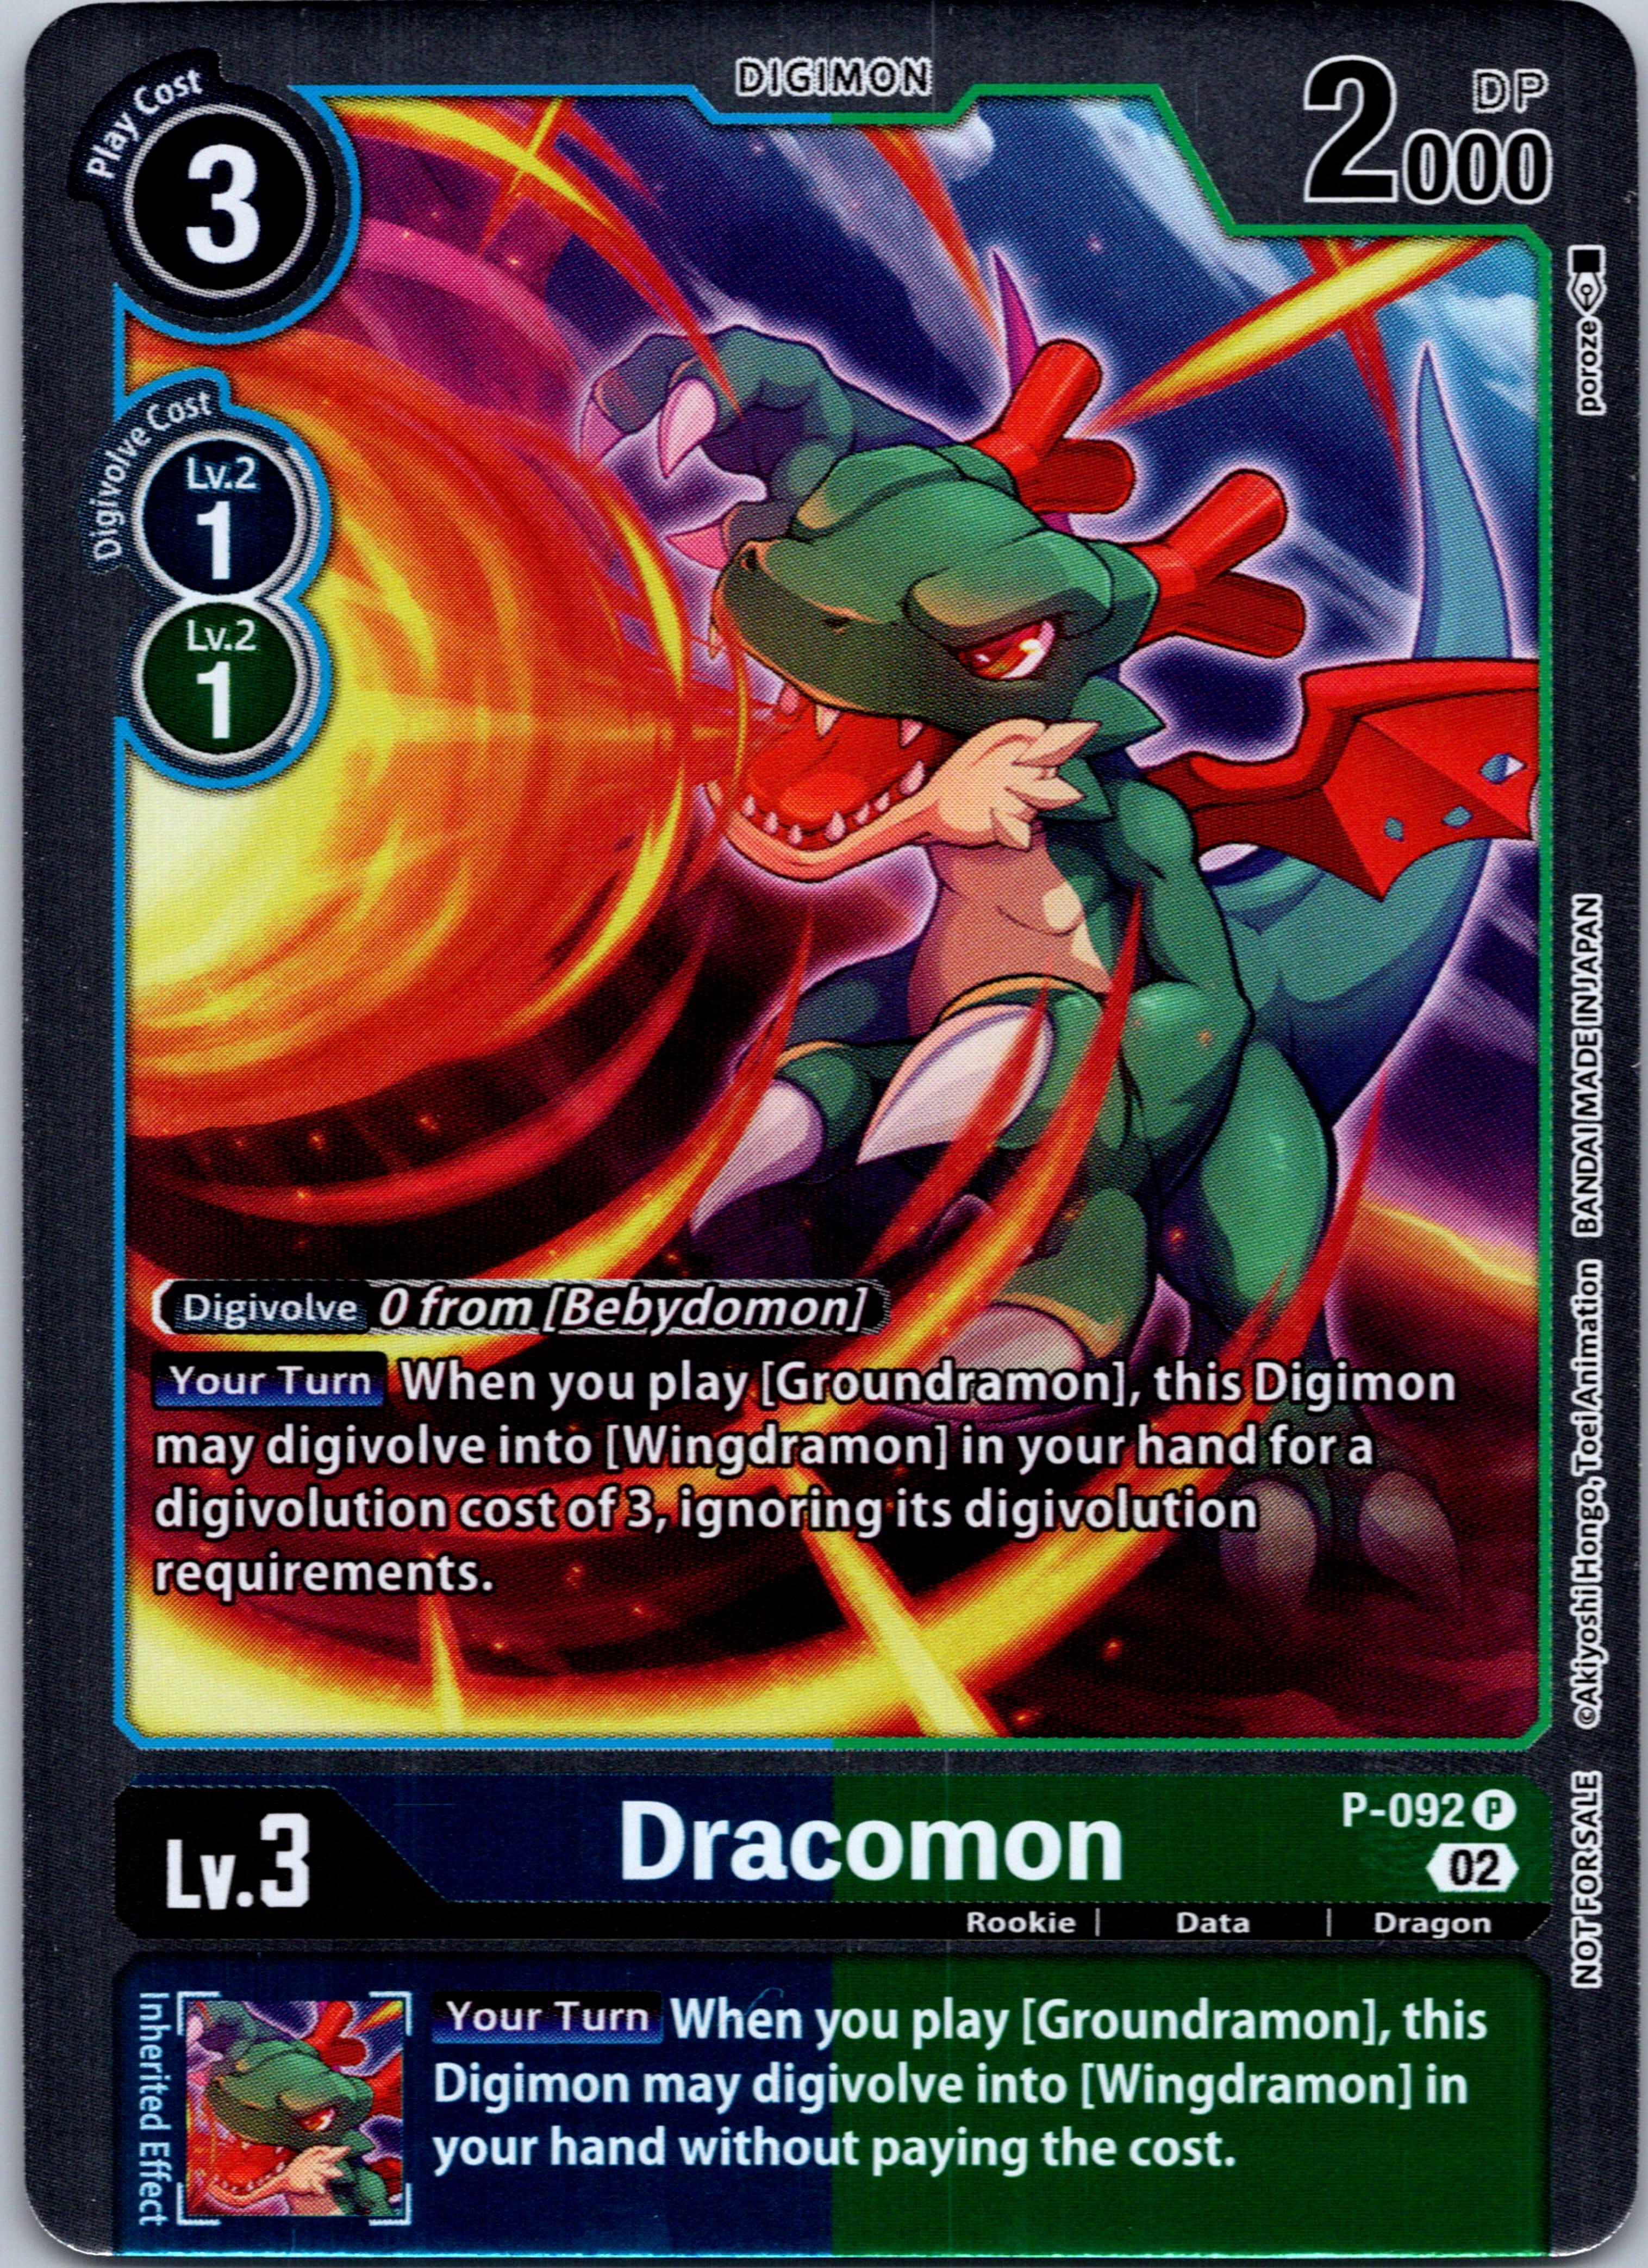 Dracomon - P-092 (3rd Anniversary Update Pack) [P-092] [Digimon Promotion Cards] Foil